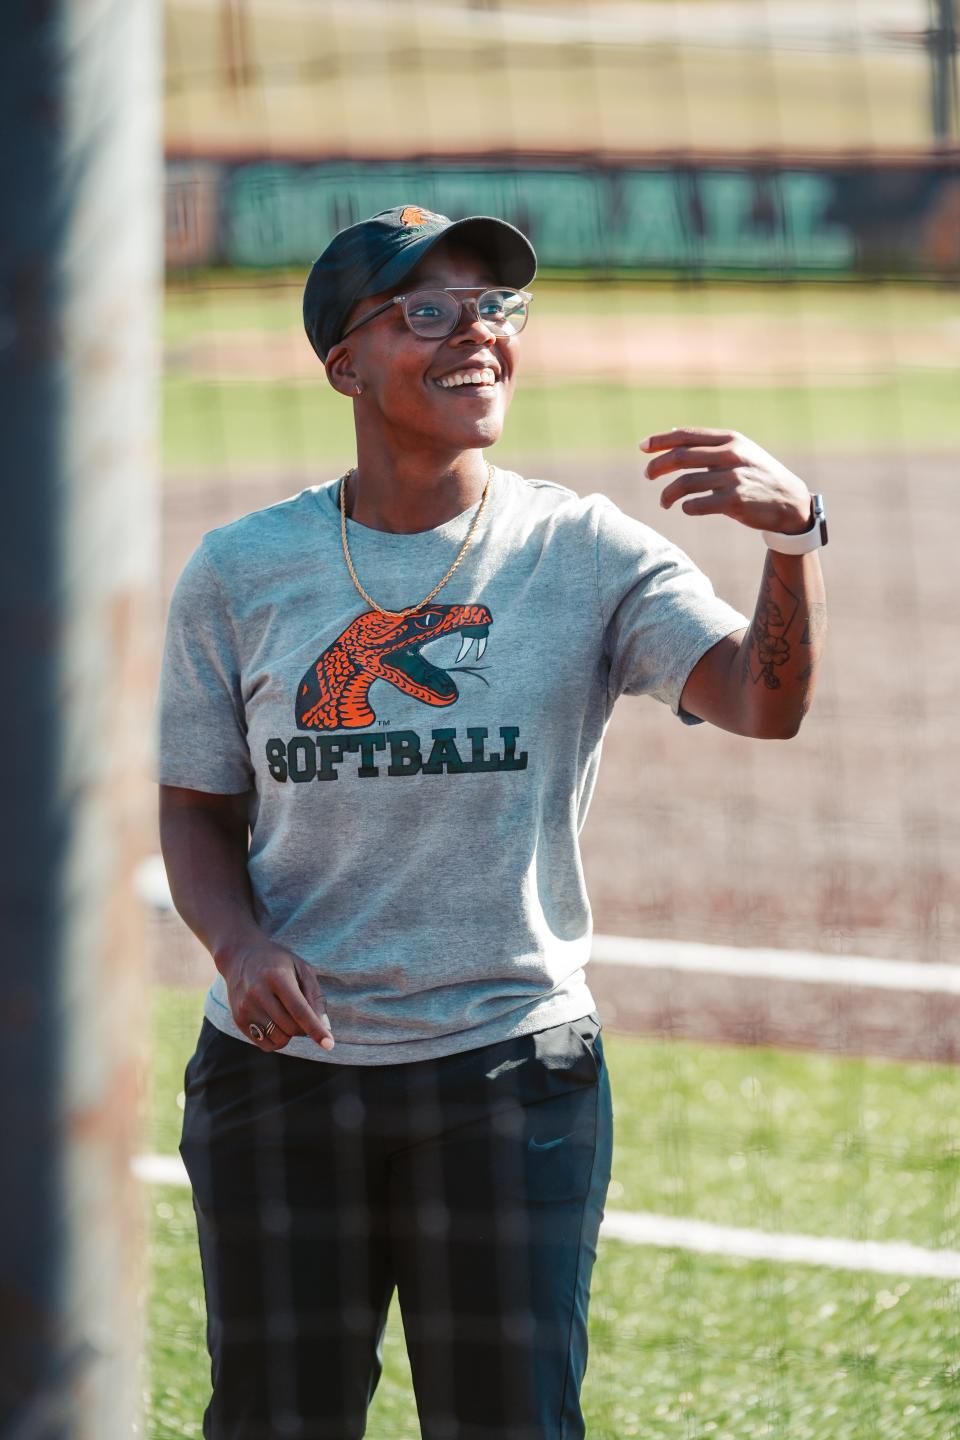 Florida A&M University softball head coach Camise Patterson rejoices at ‘Fan Day’ scrimmage game in Tallahassee, Florida, Saturday, Feb. 4, 2023